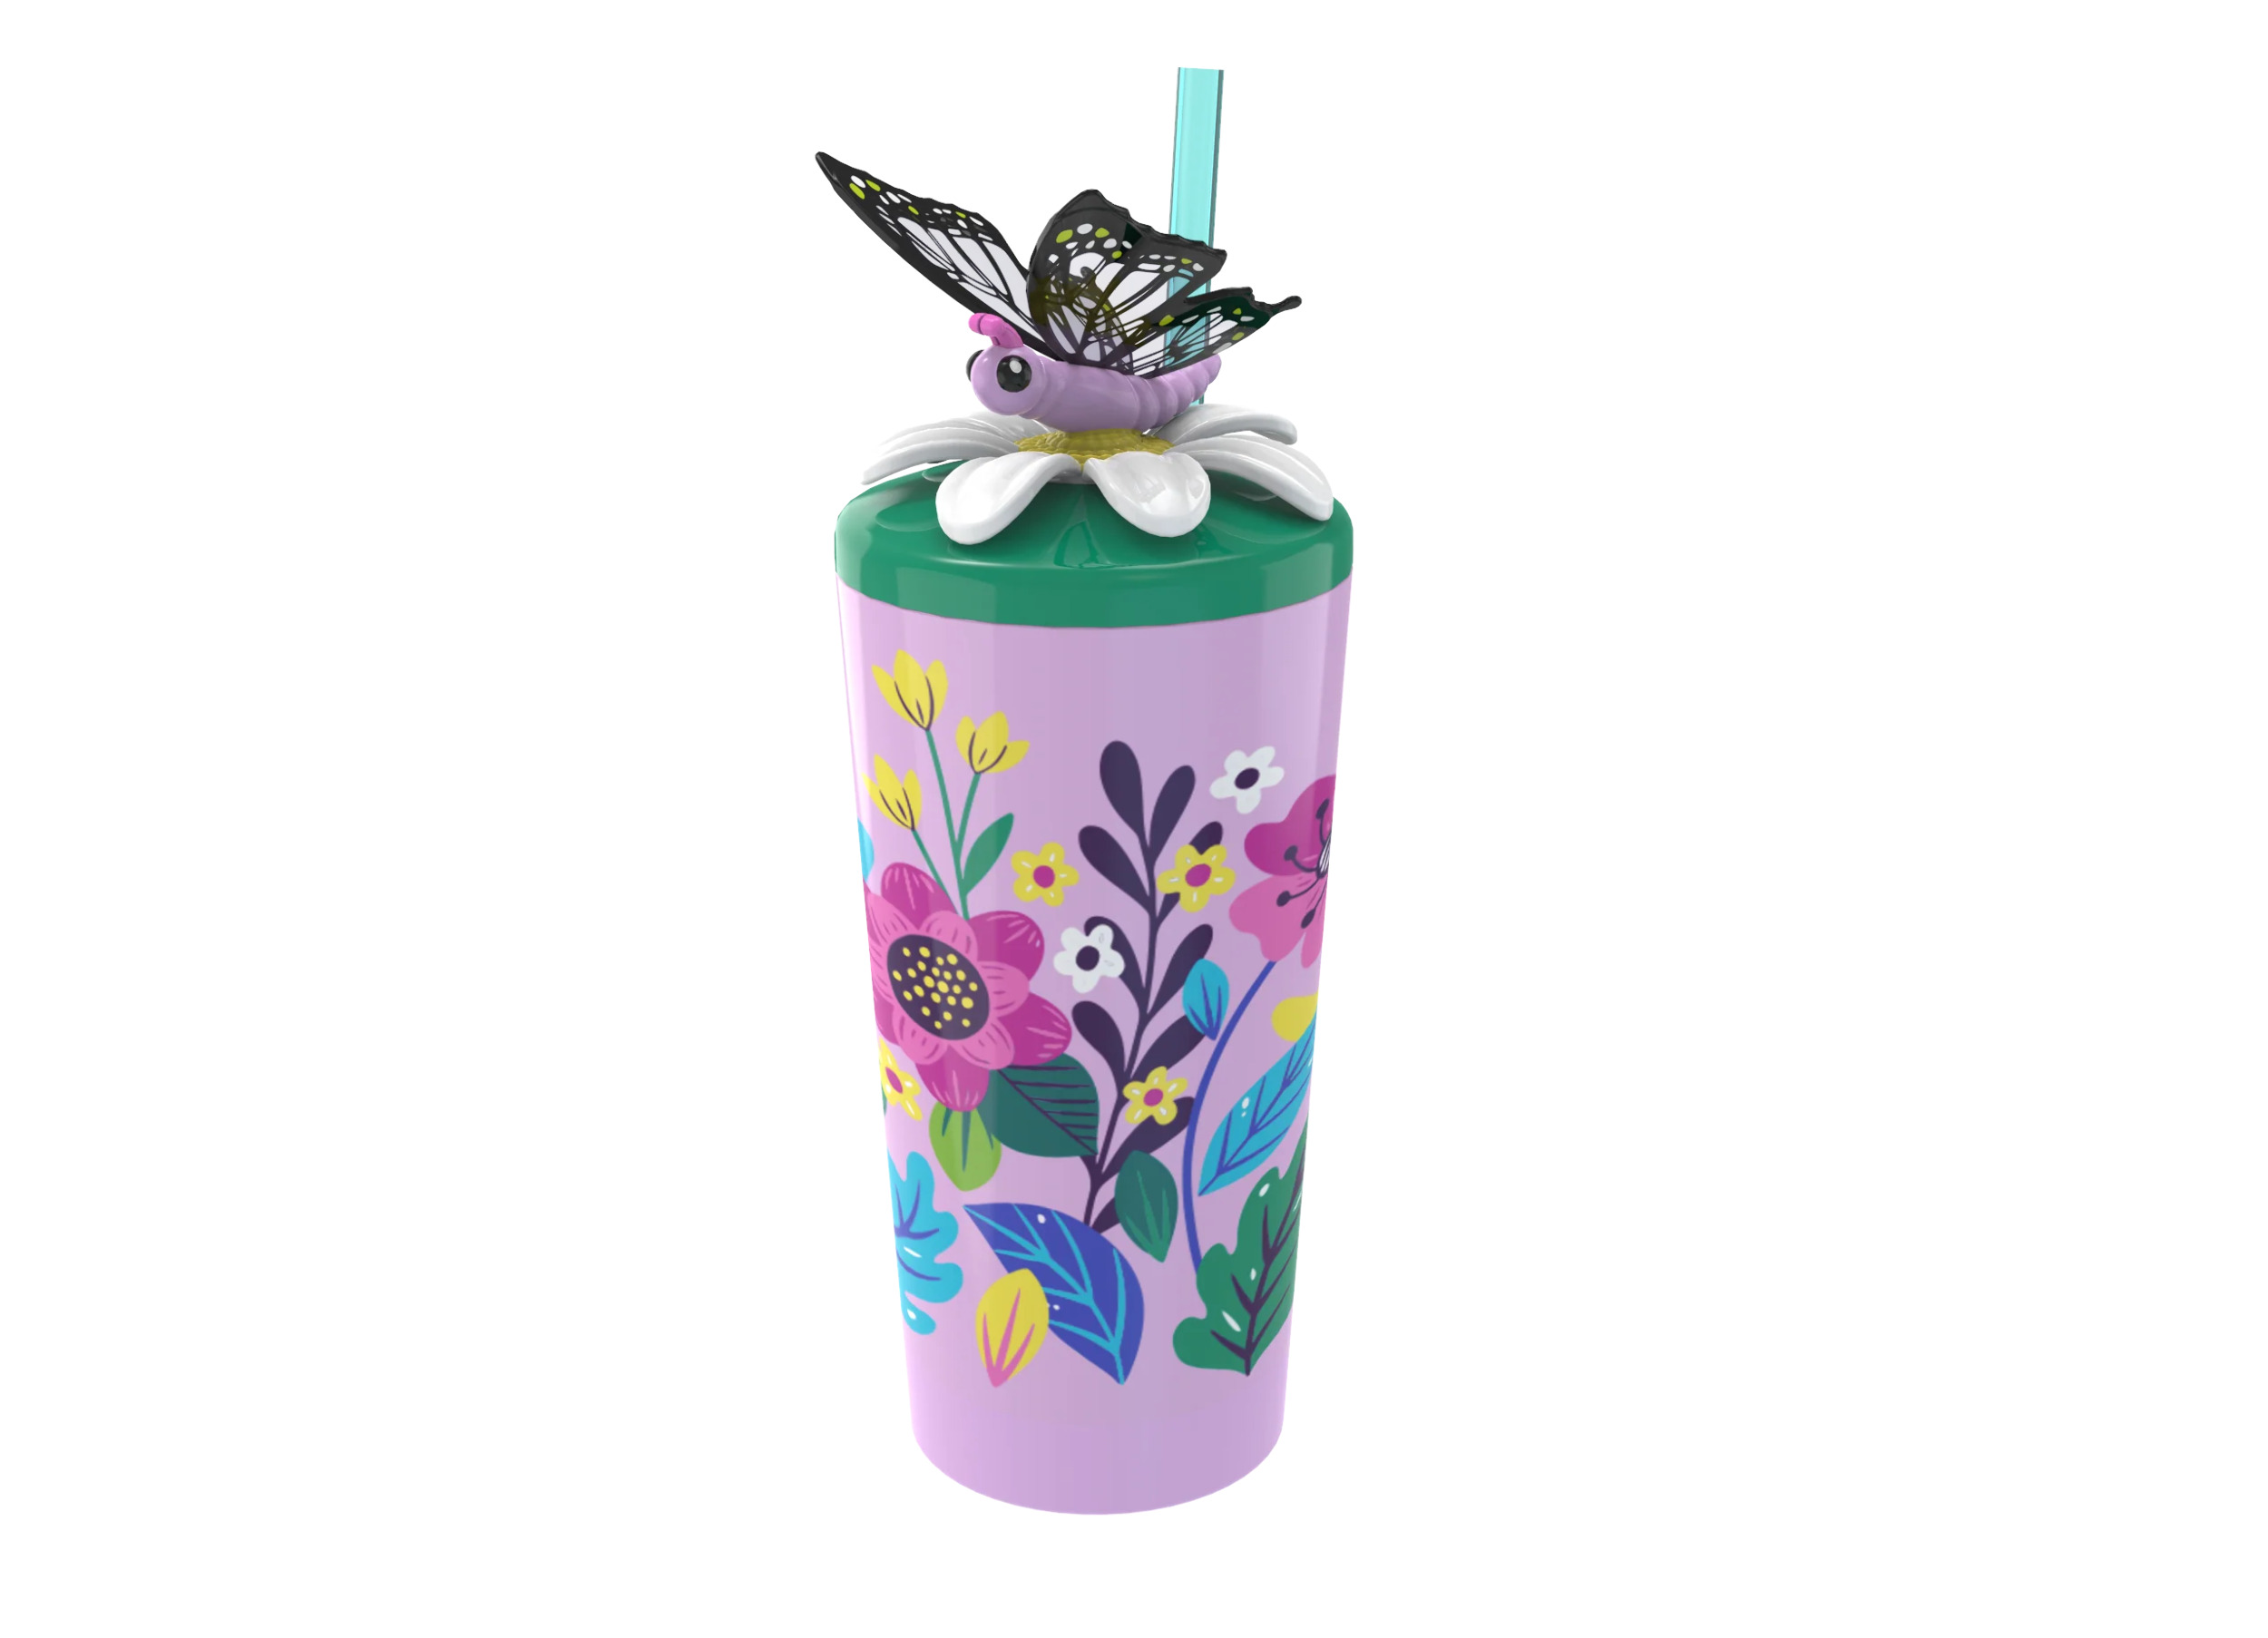 Cool Gear 4-Pack 18 oz Fun Toppers Butterfly Character Lid Tumblers with straw included | Durable, Reusable Water Bottle Gift for Kids, Adults - image 5 of 5